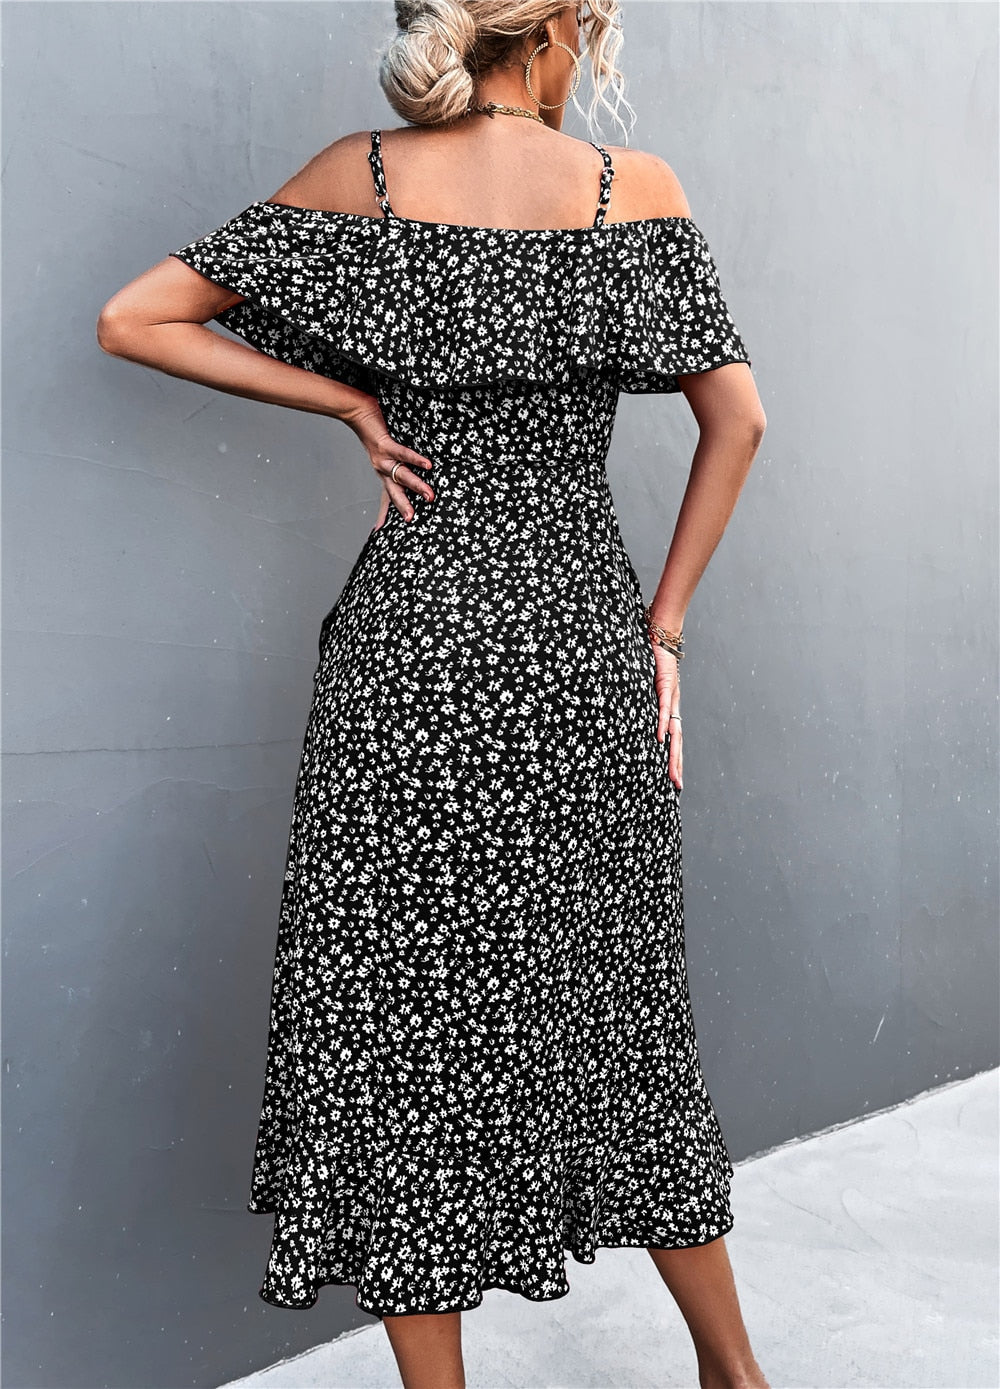 Summer Straps Midi Dress Beach Casual Party Off Shoulder Slim Ruffles Floral Print Dresses The Clothing Company Sydney